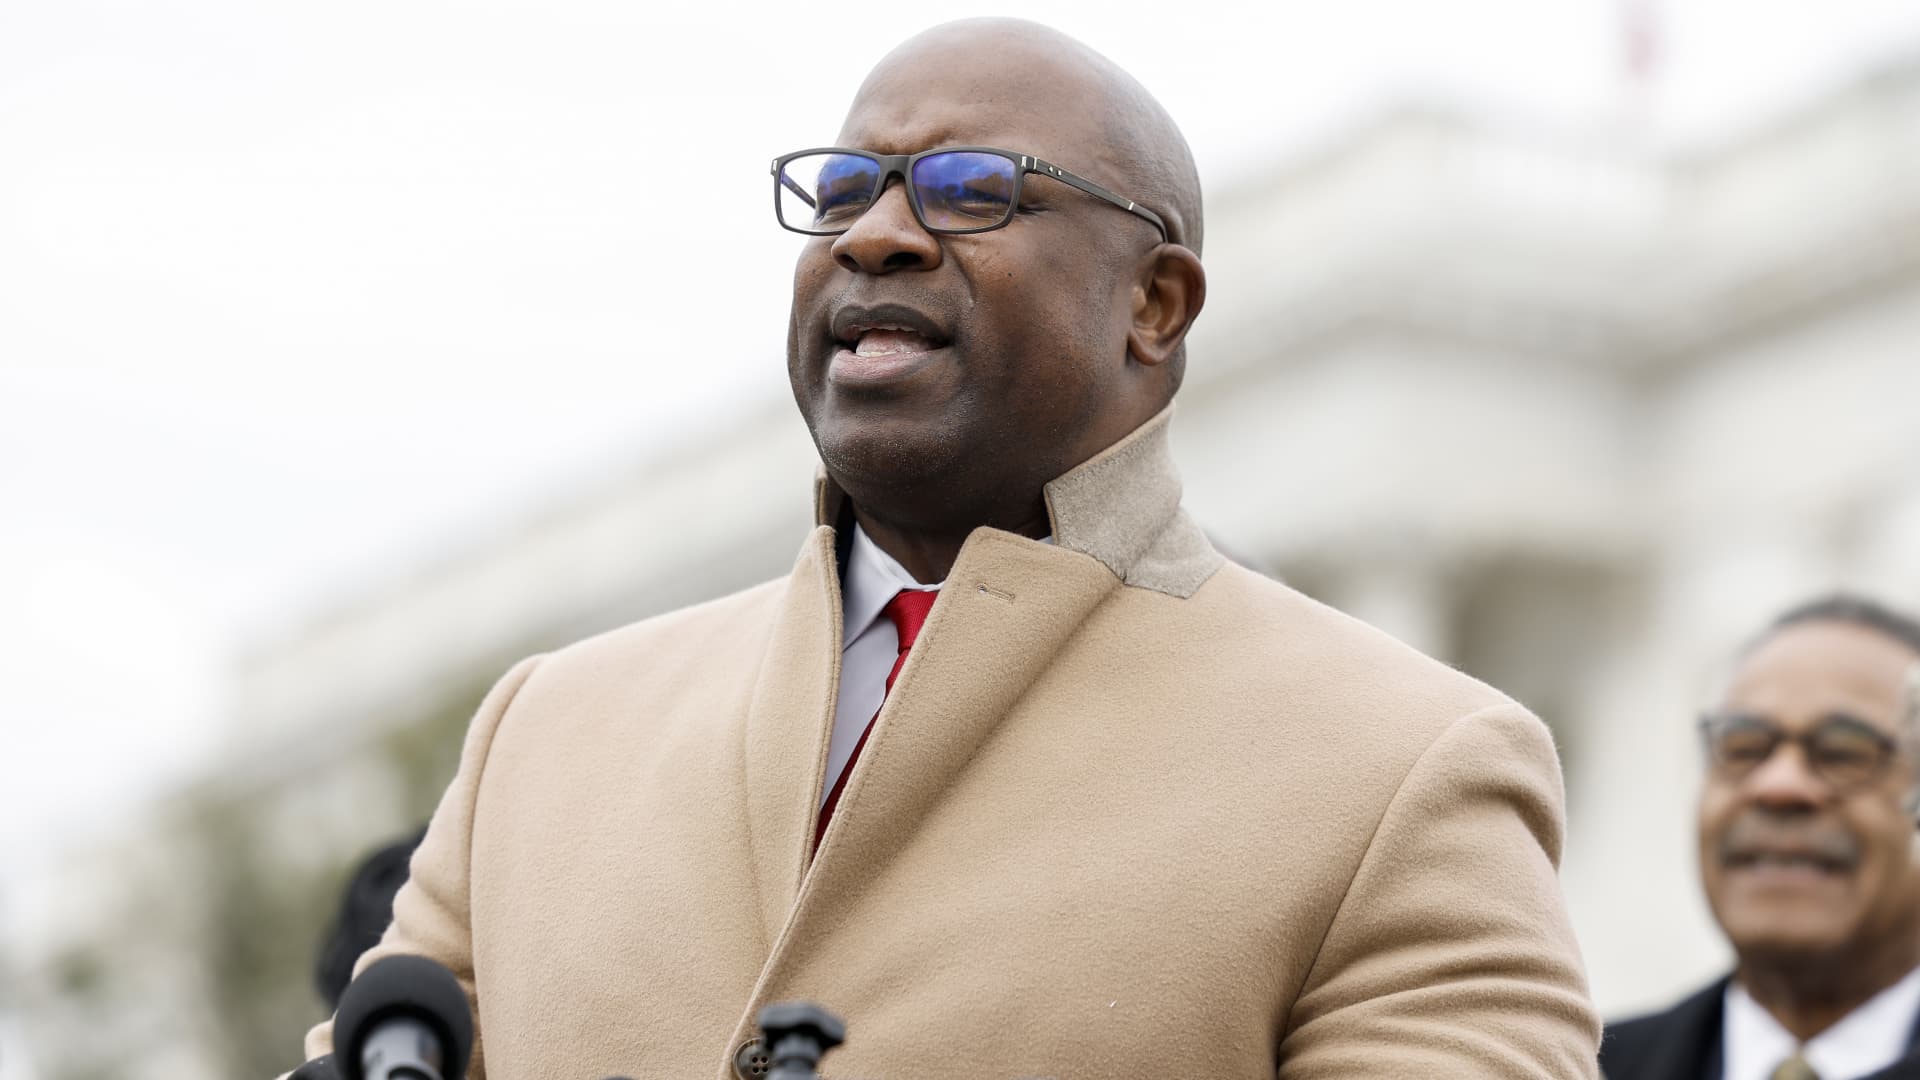 Rep. Jamaal Bowman (D-NY) speaks at a news conference outside the U.S. Capitol Building on February 02, 2023 in Washington, DC.